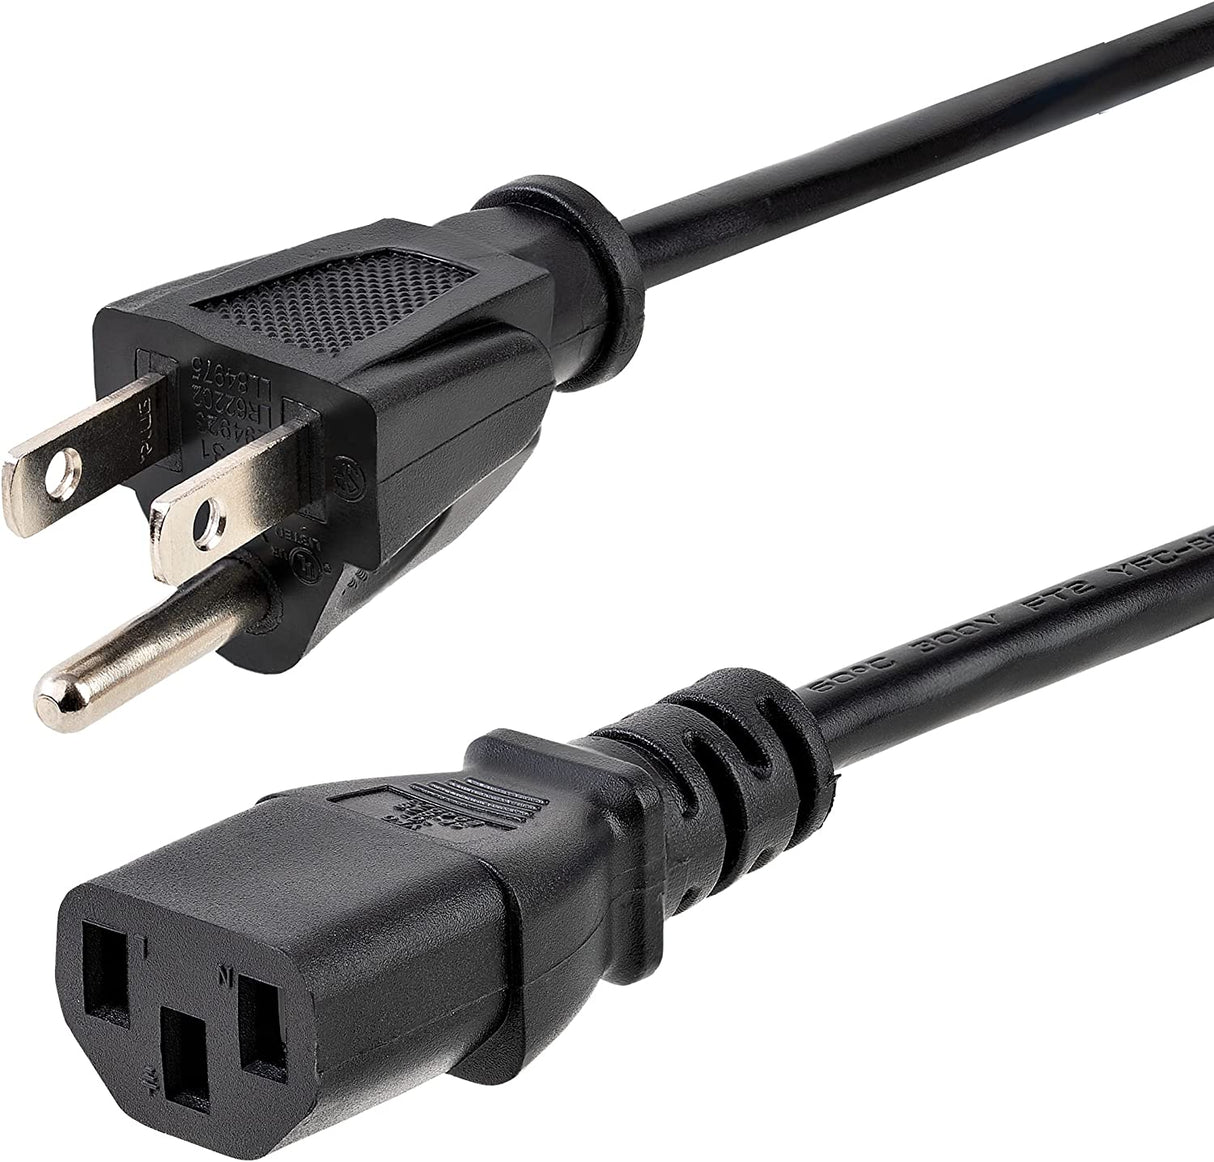 StarTech.com 12ft (3.6m) Computer Power Cord, NEMA 5-15P to C13, 10A 125V, 18AWG, Black Replacement AC Power Cord, Printer Power Cord, PC Power Supply Cable, Monitor Power Cable - UL Listed (PXT10112) 12 ft/3.6 m 1 Pack